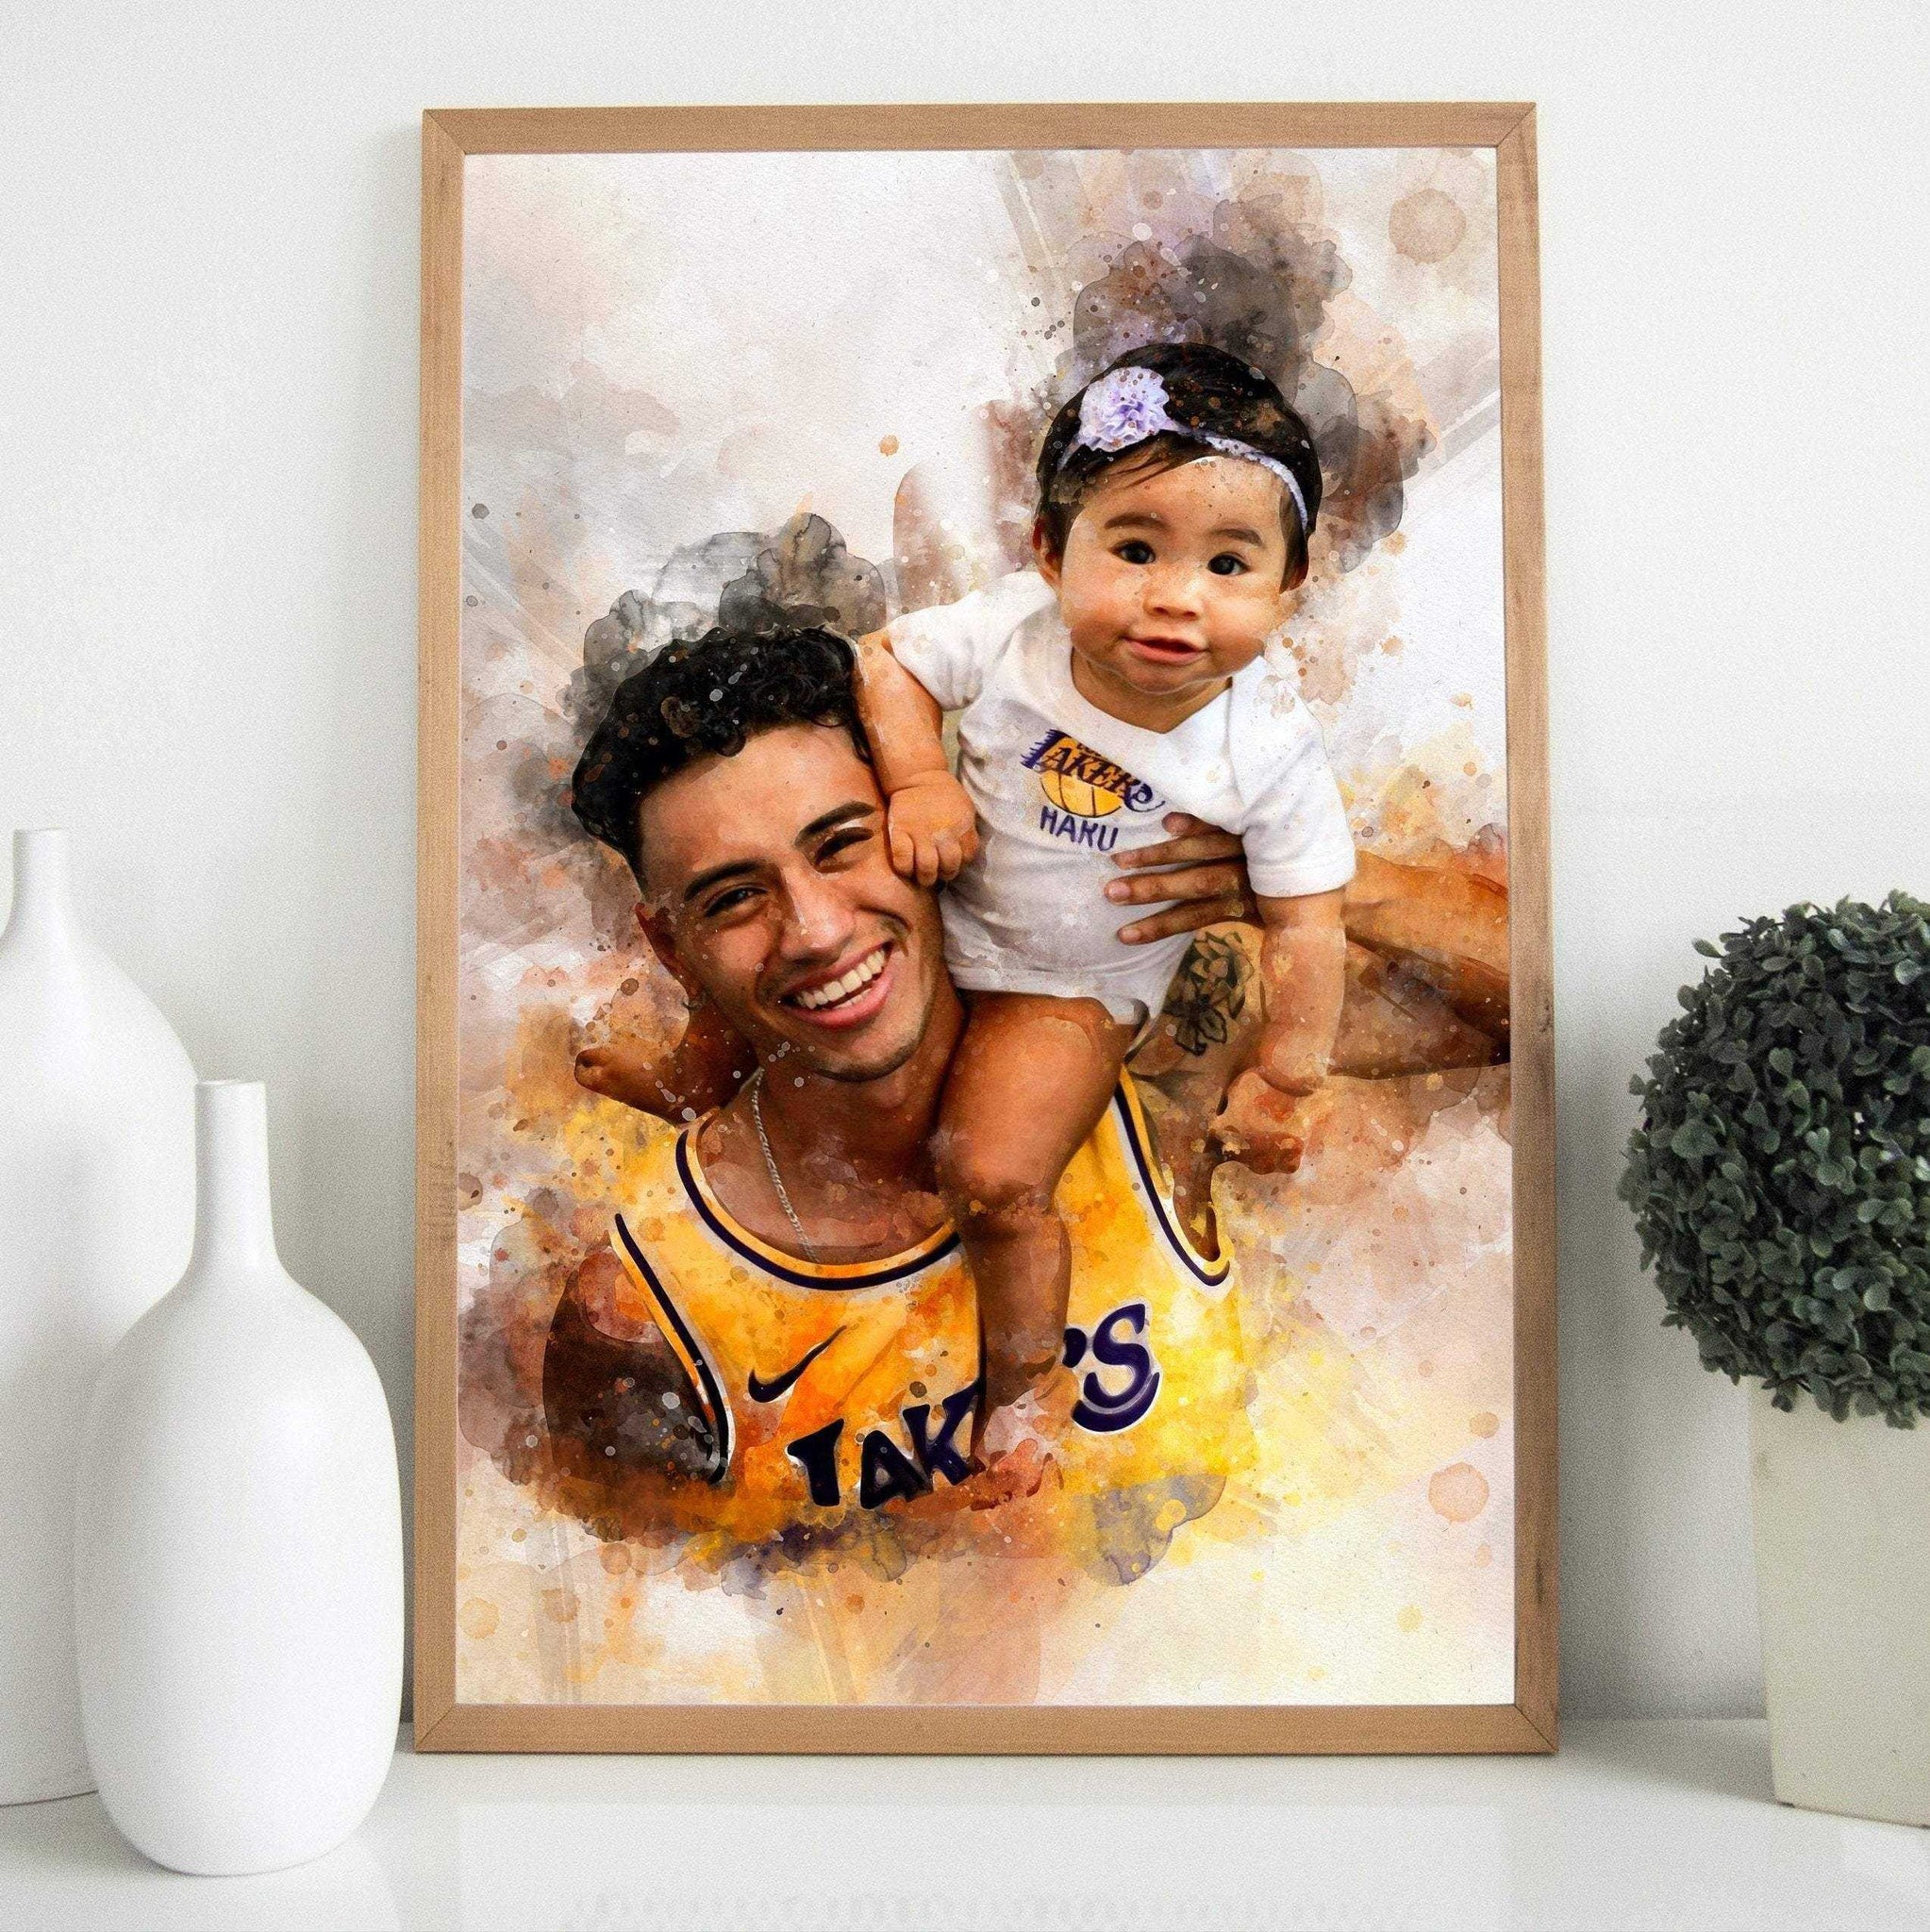 Painting Picture | Custom Painted Pictures on Canvas From Your Photo - FromPicToArt